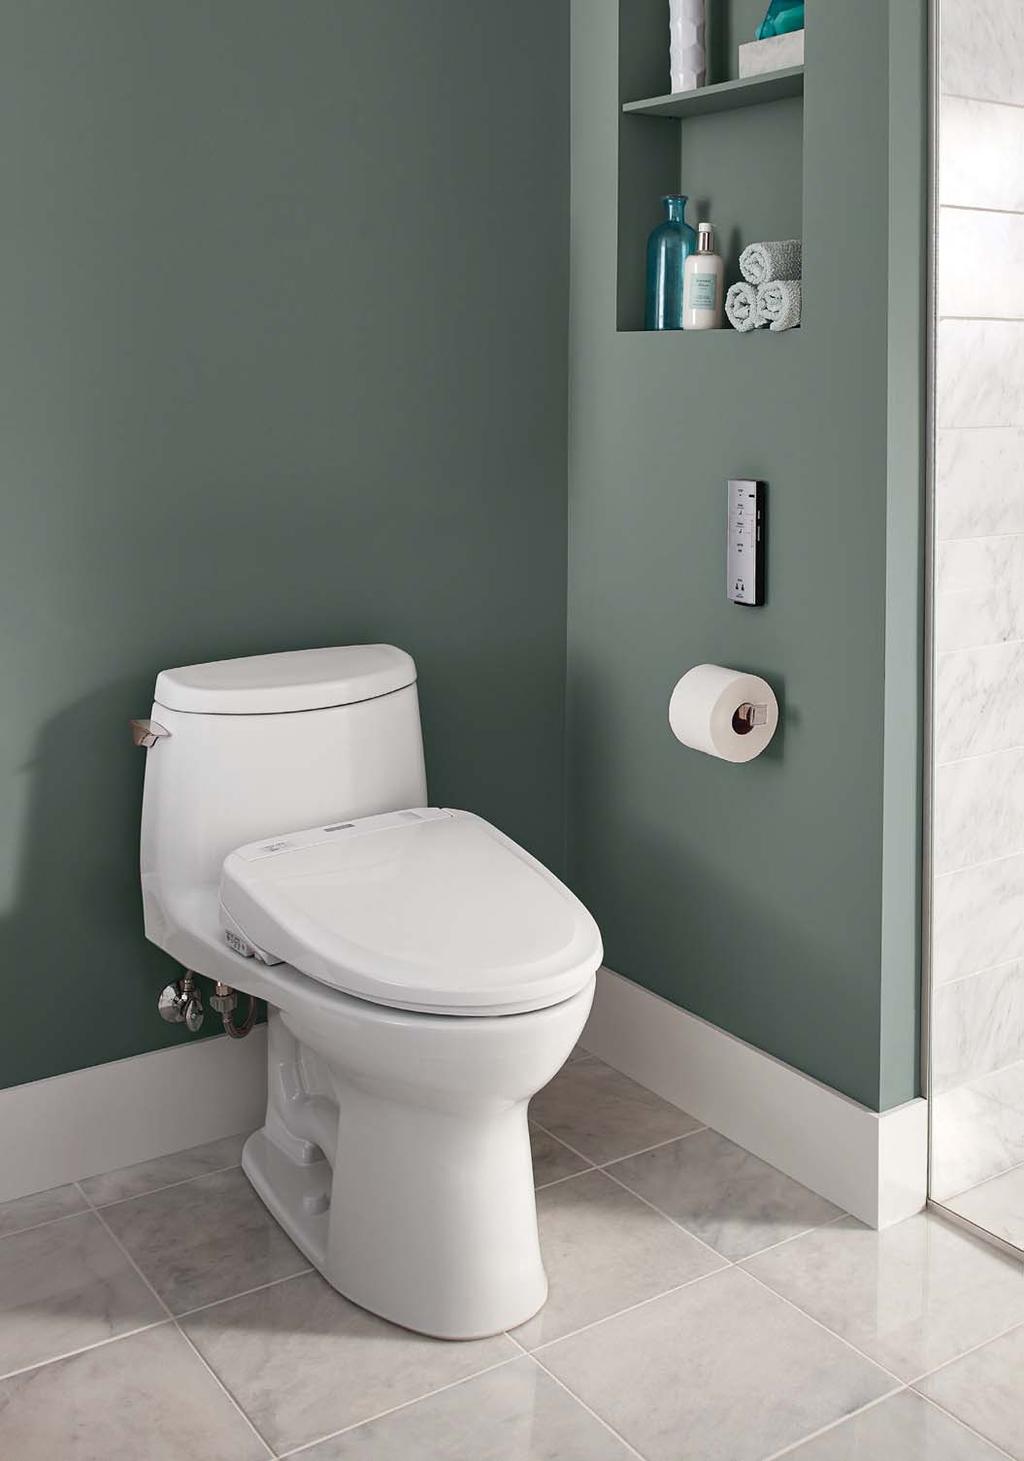 26 WASHLET+ BROCHURE WASHLET + RECOMMENDED MODELS To achieve the best in comfort and hygiene, TOTO recommends these models that deliver the best performance TOTO has to offer.